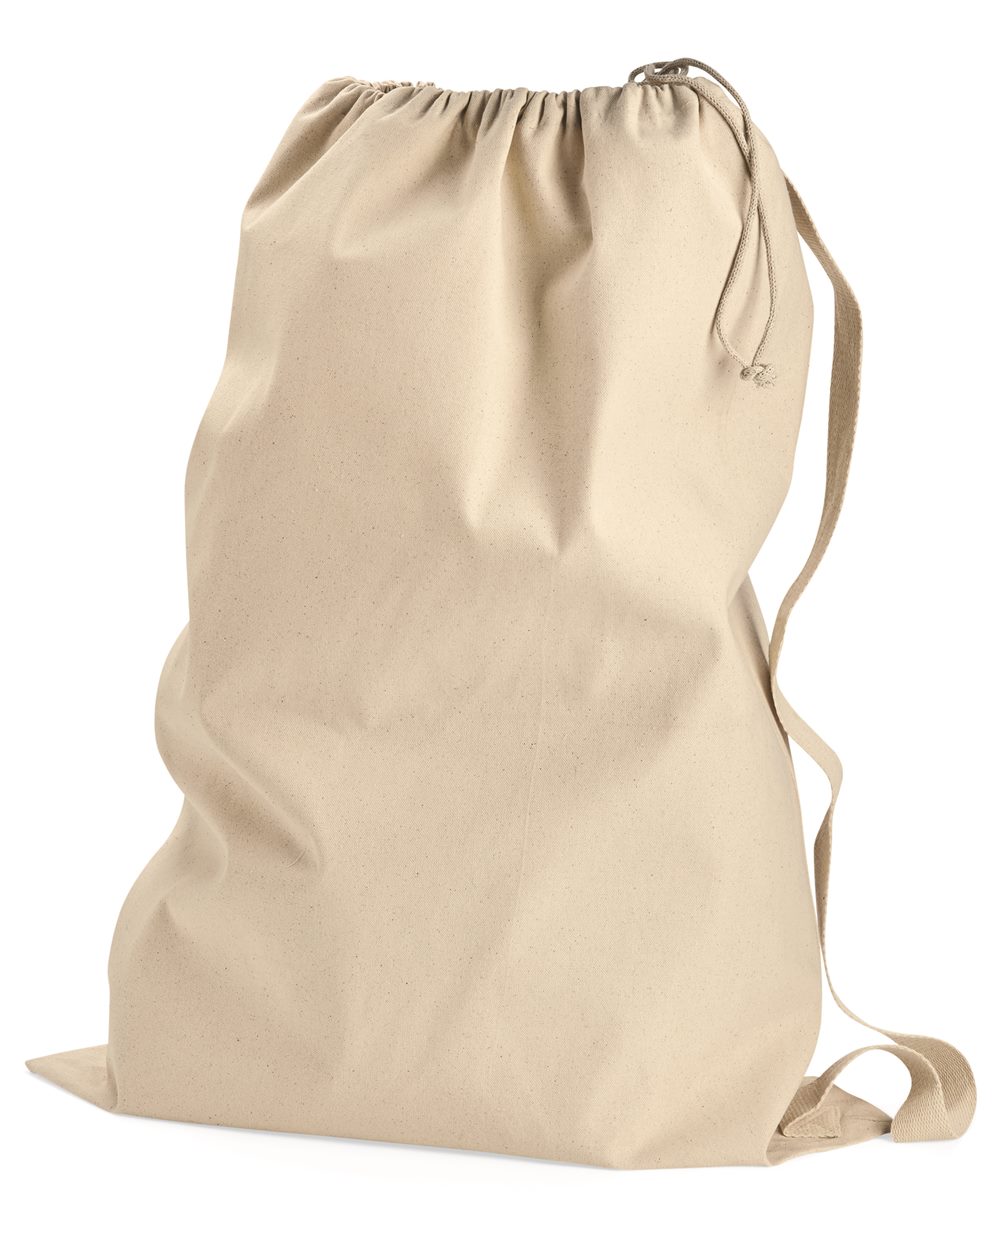 OAD Oad110 Large Laundry Bag - Natural - One Size